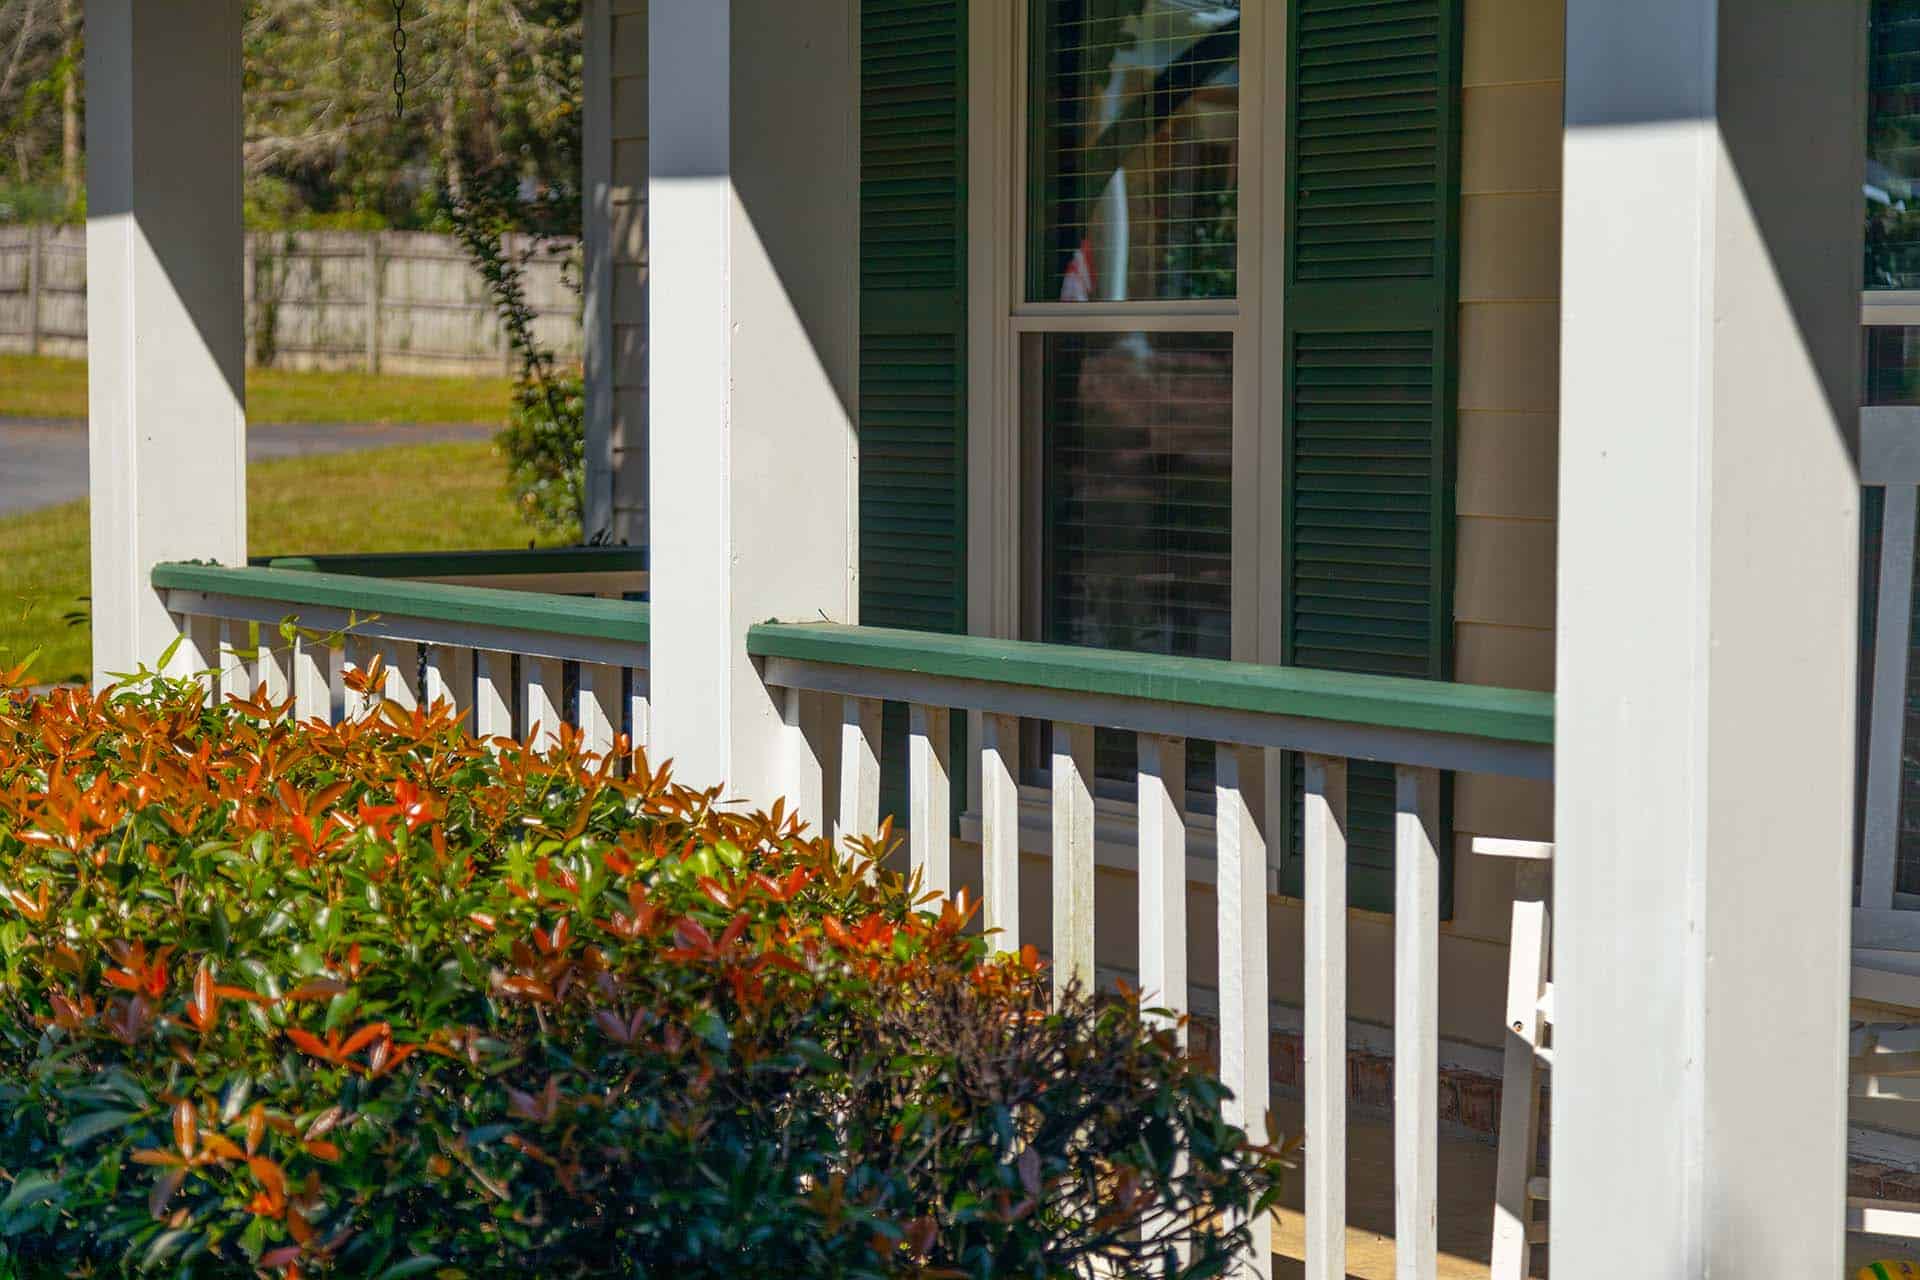 A painted front porch railing with bushes in front